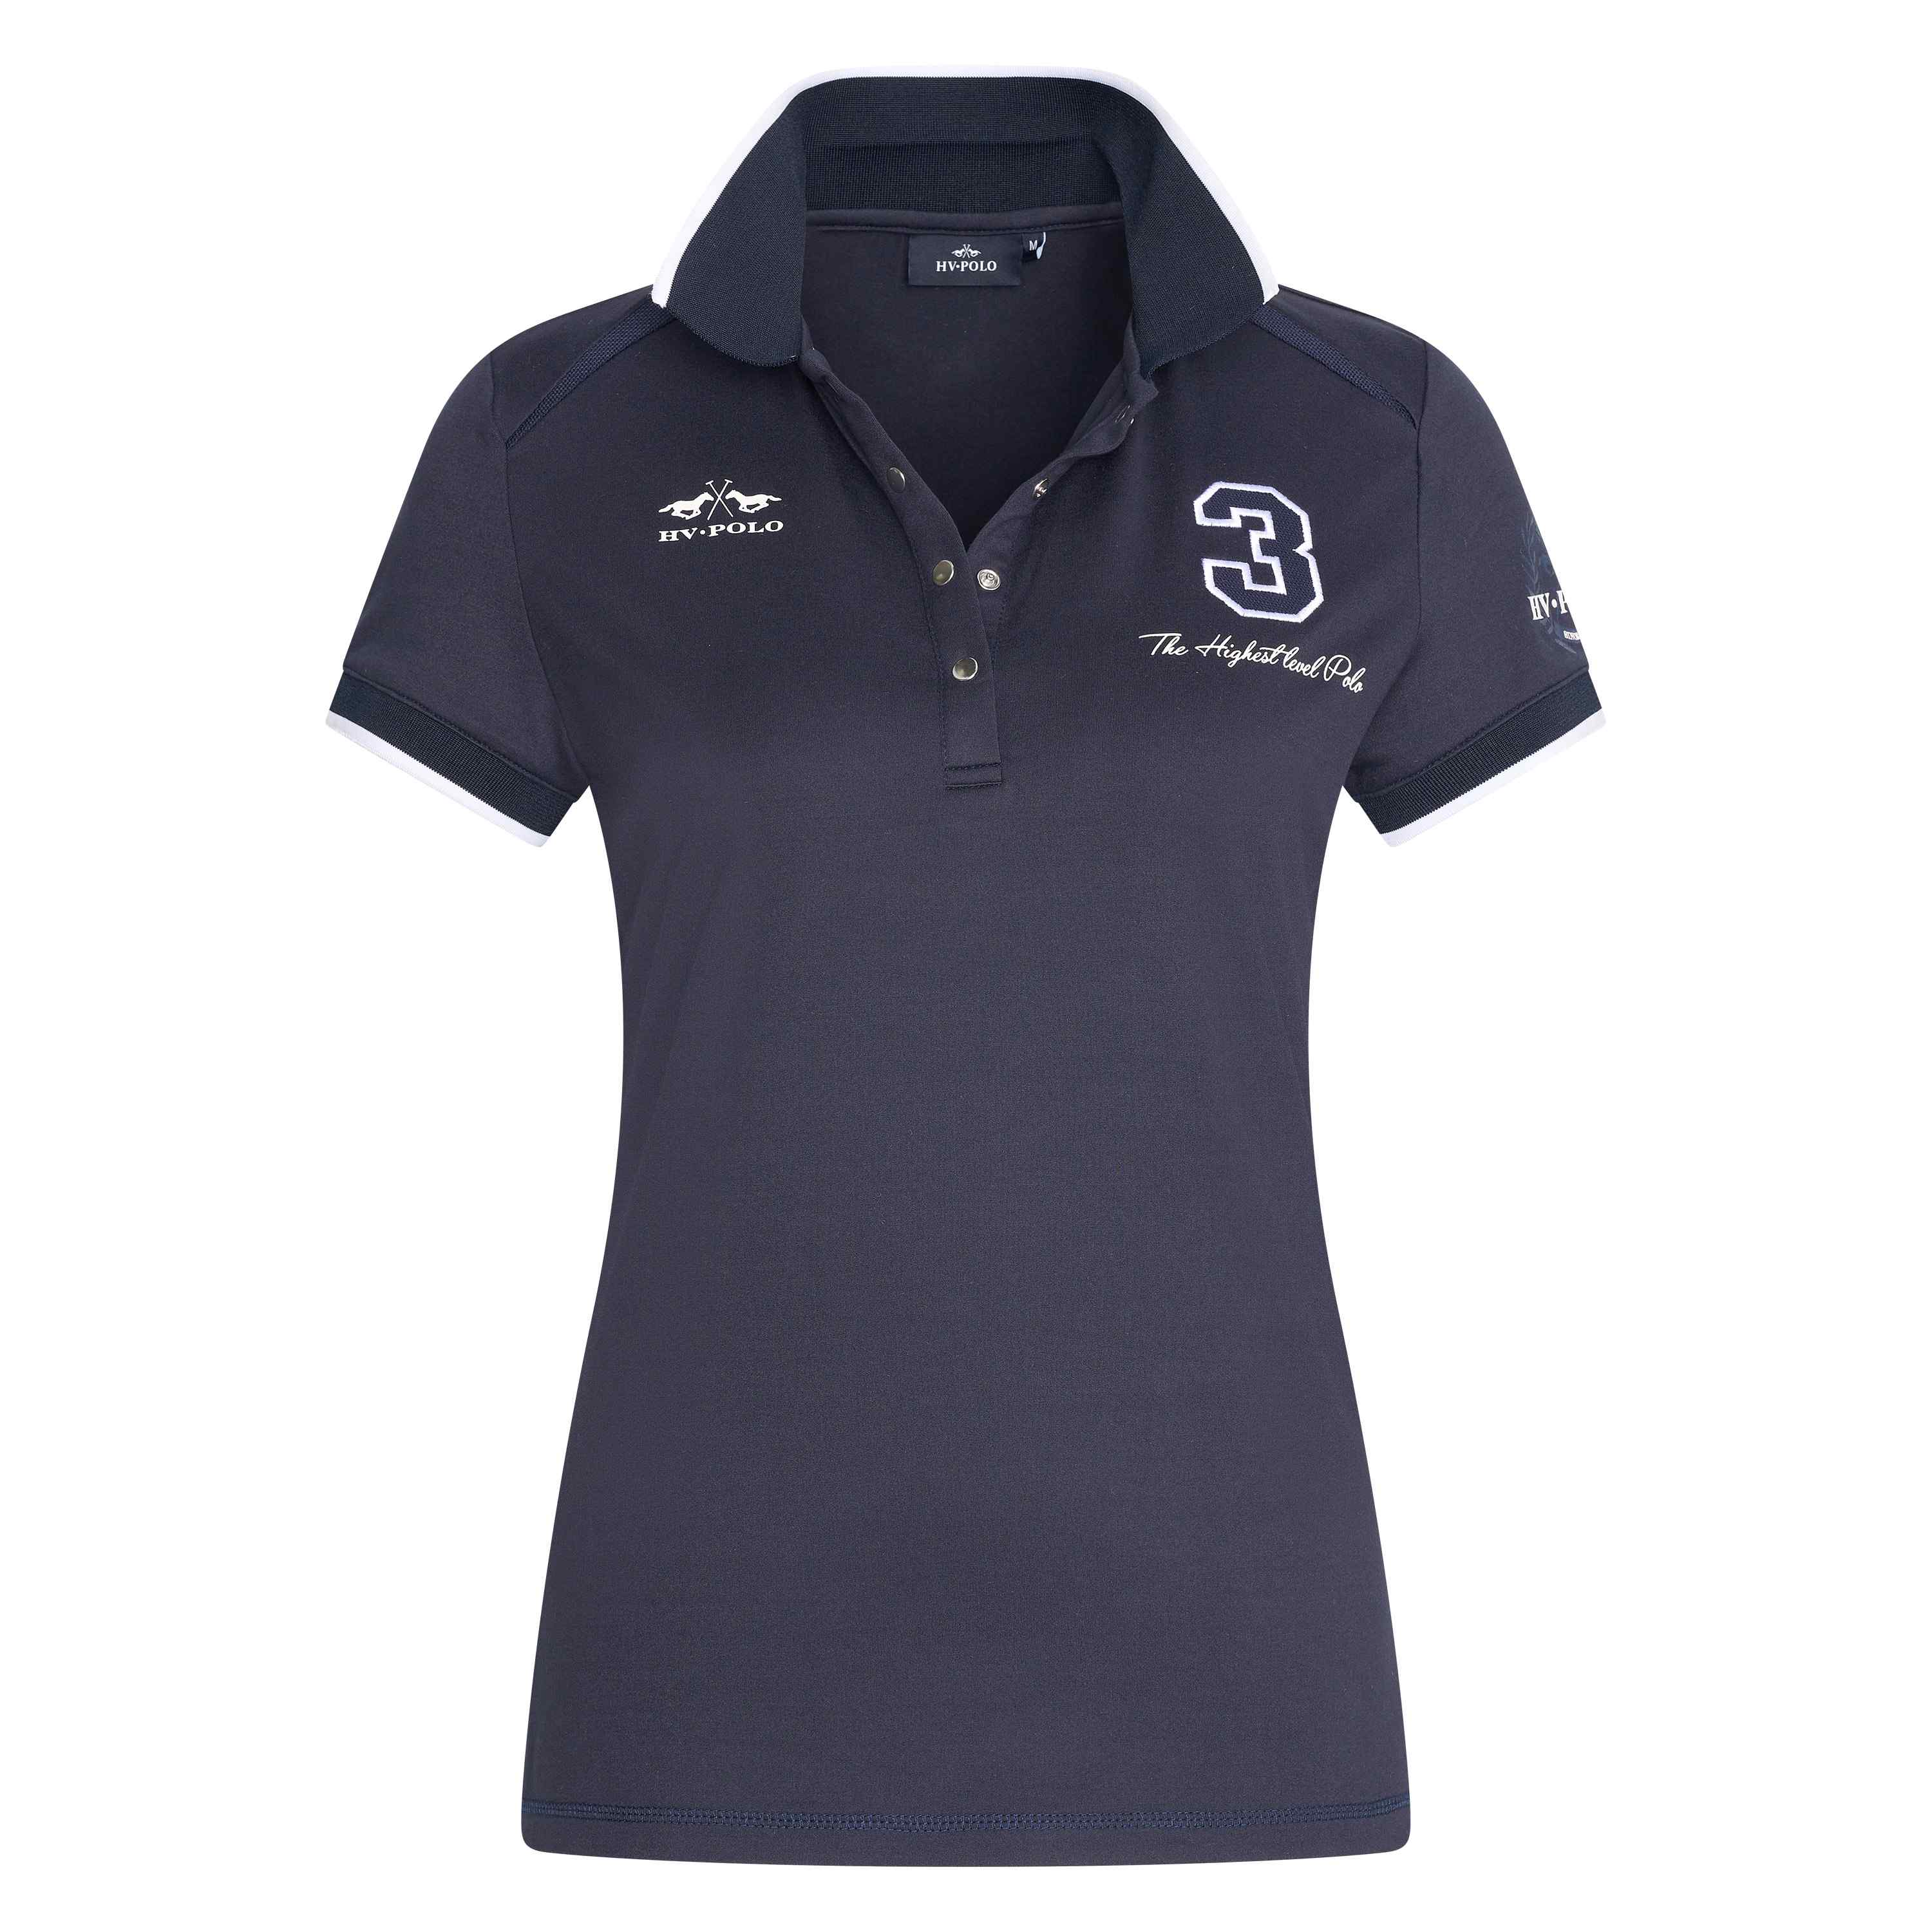 HV POLO stylisches Damen Funktions Polo Shirt Favouritas - navy - L - 1